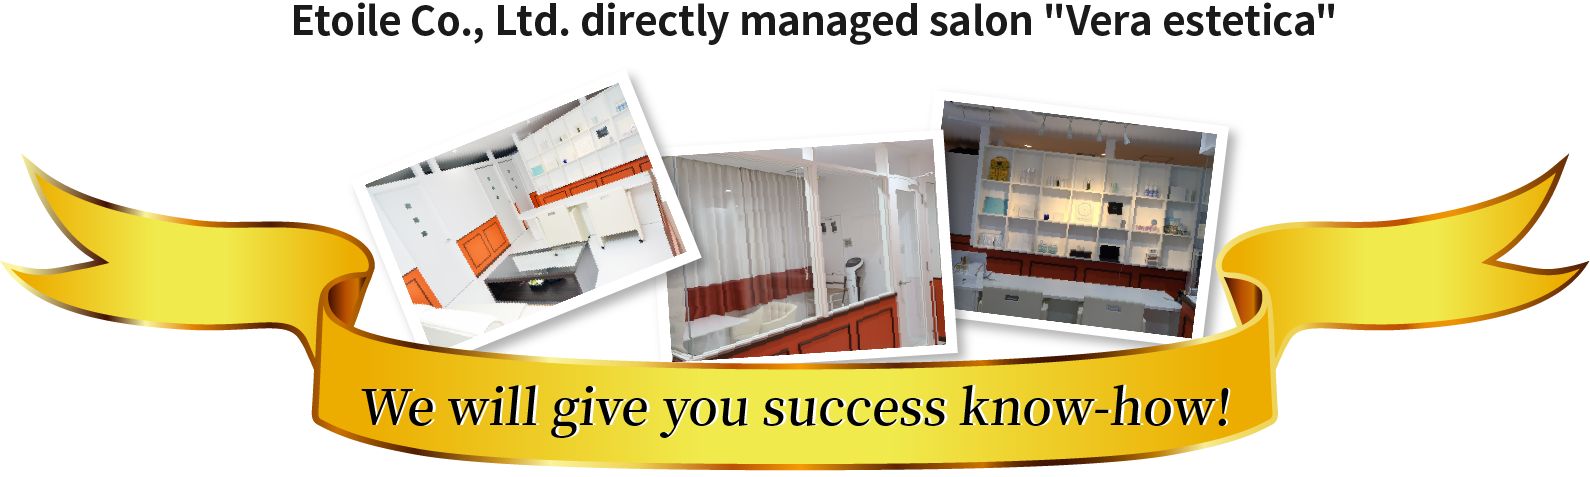 Etoile Co., Ltd. directly managed salon Vera estetica We will give you success know-how!We will give you success know-how!